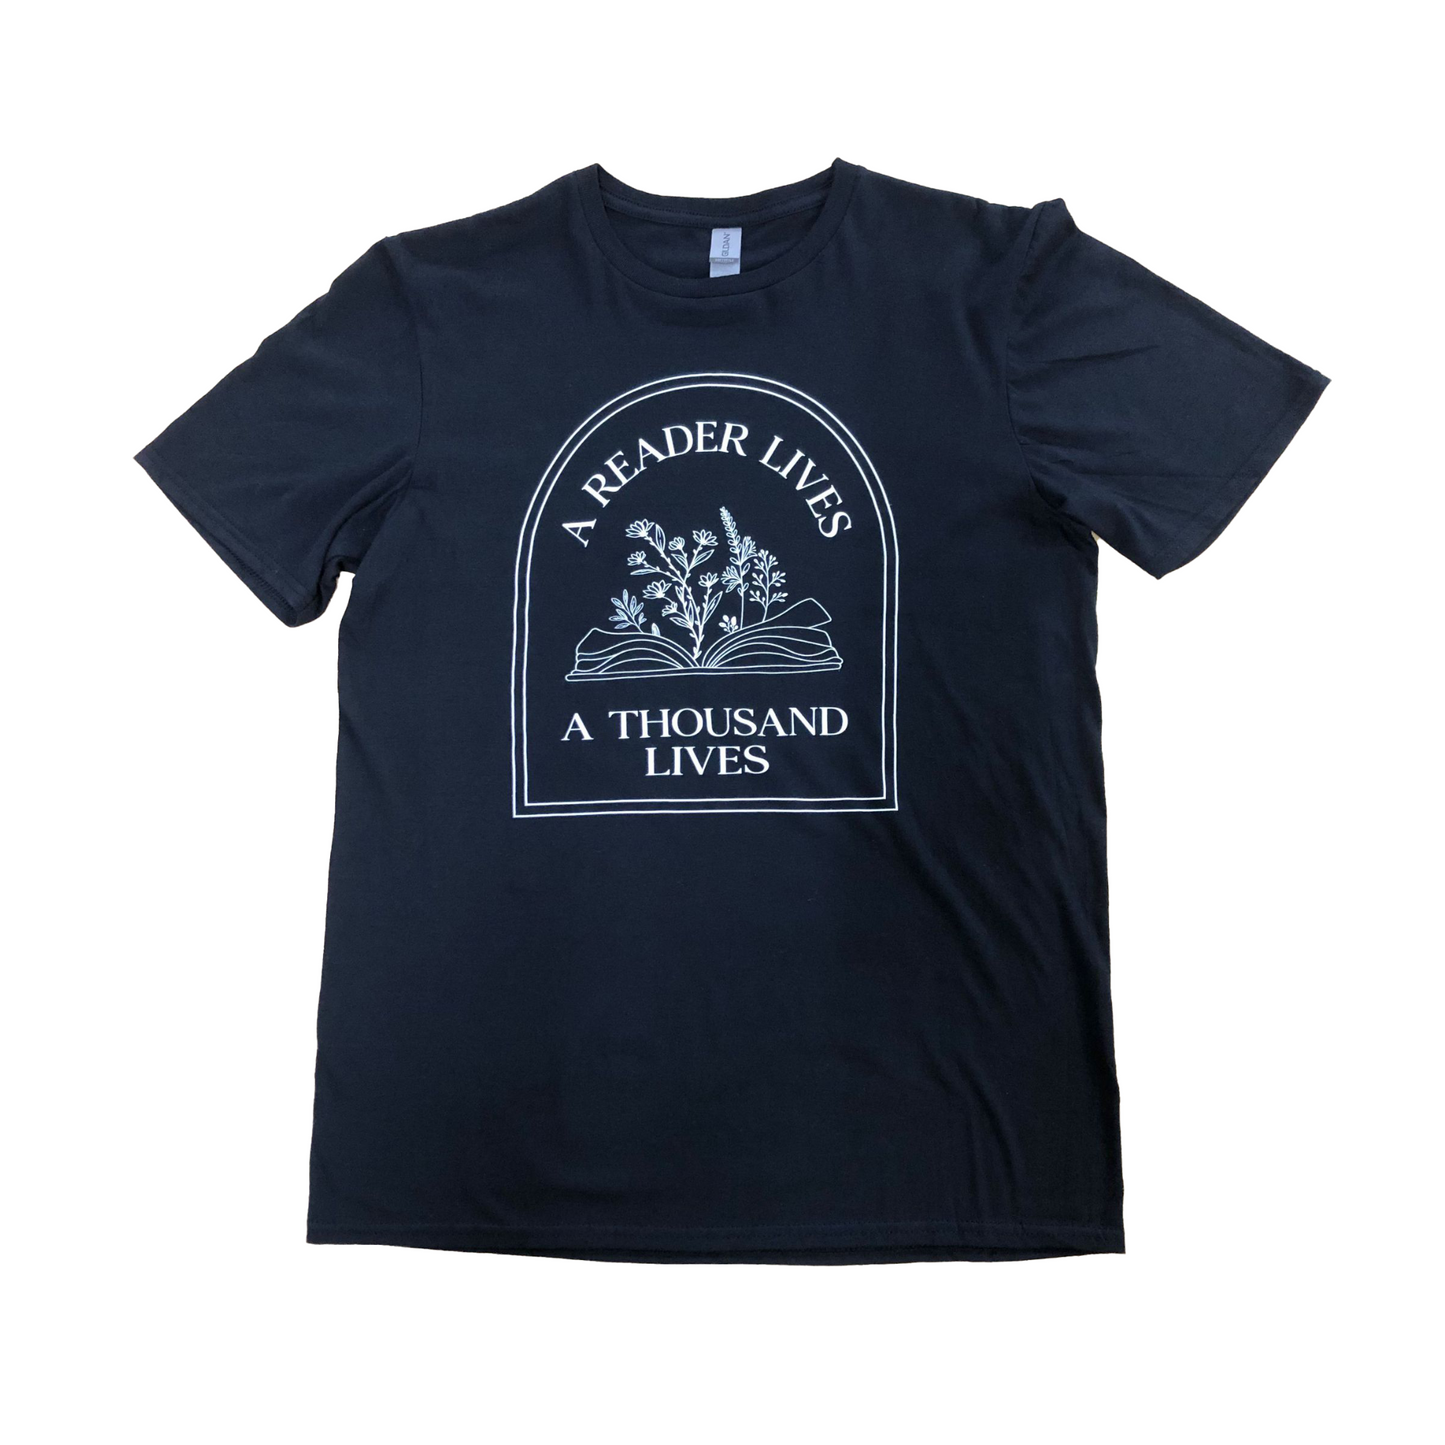 black tee that says "A Reader Lives a Thousand Lives"